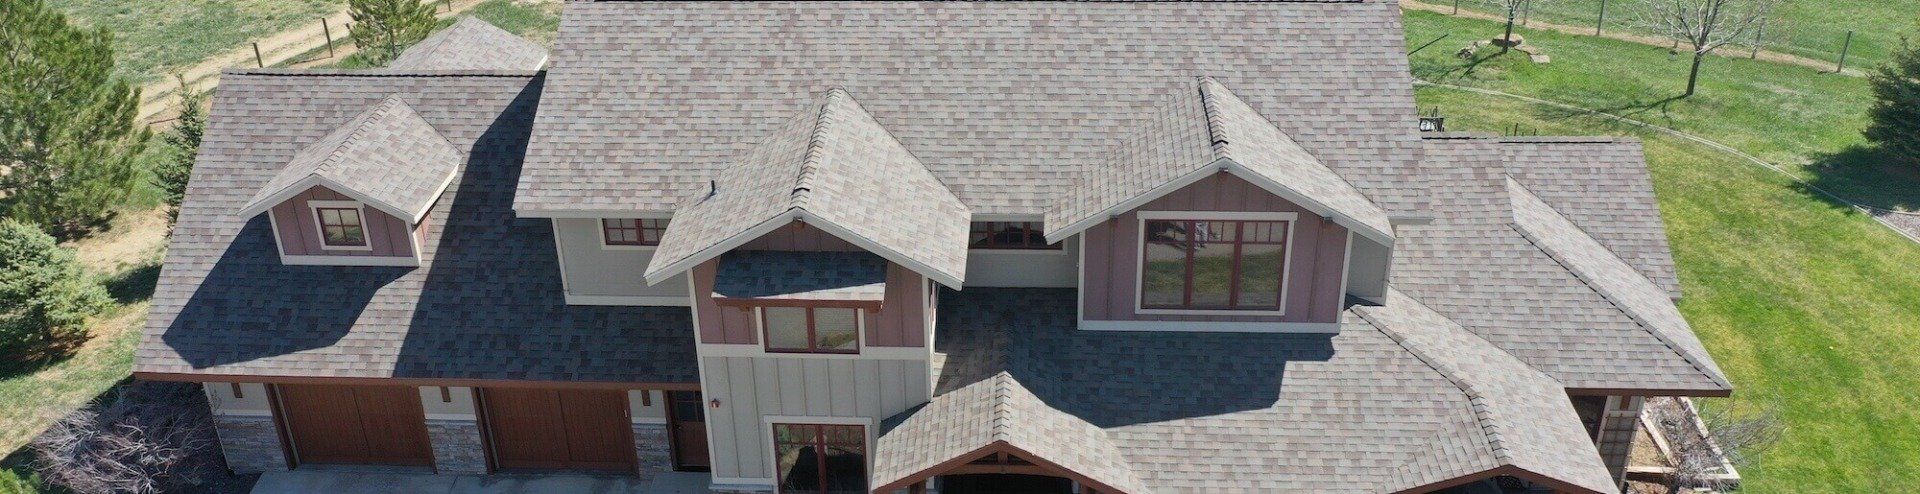 roof replacement companies in Fort Collins CO